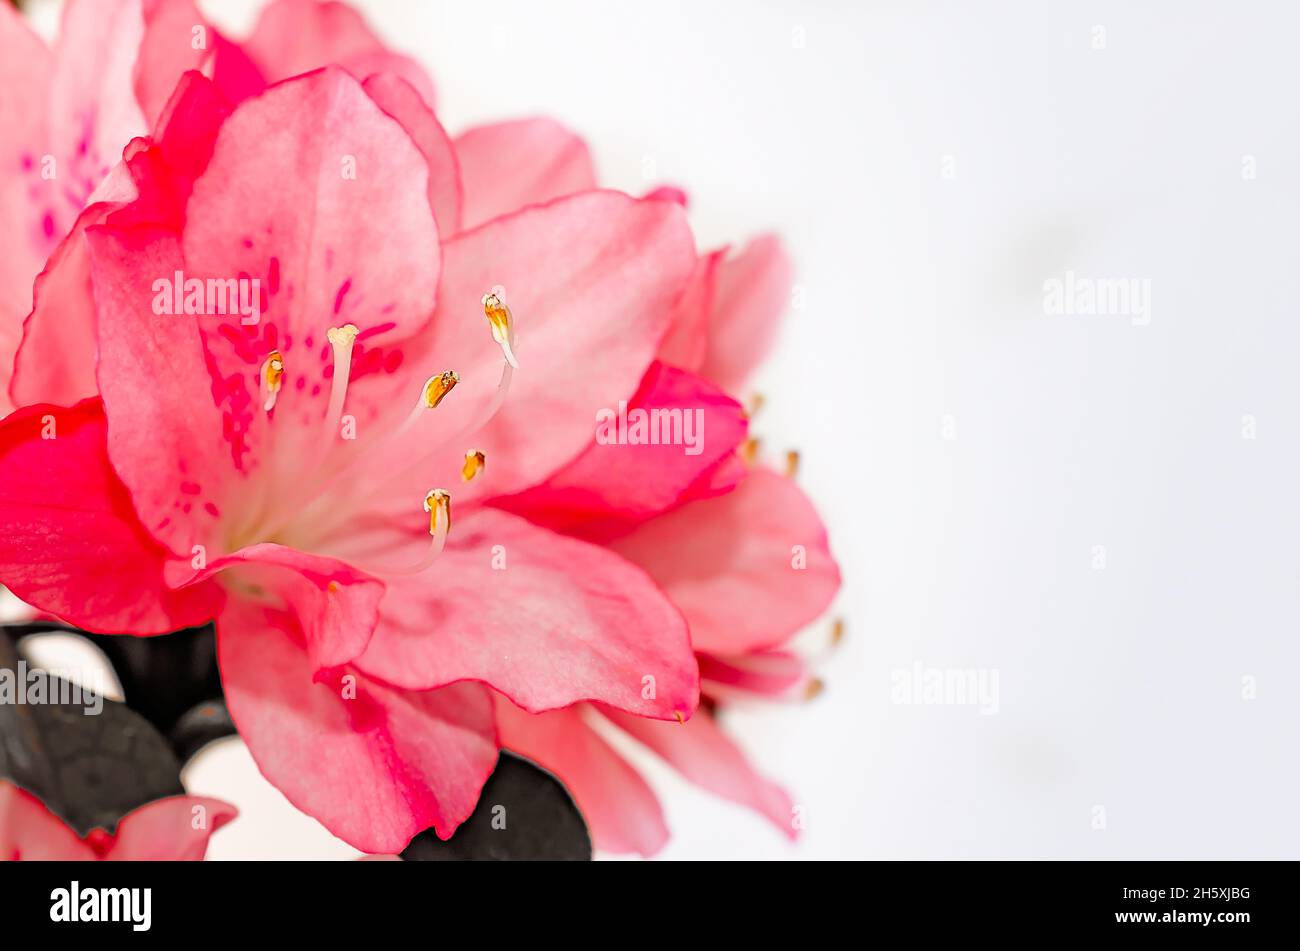 Southern Indian azaleas (Rhododendron indicum) are pictured on white, April 8, 2014, in Mobile, Alabama. Stock Photo